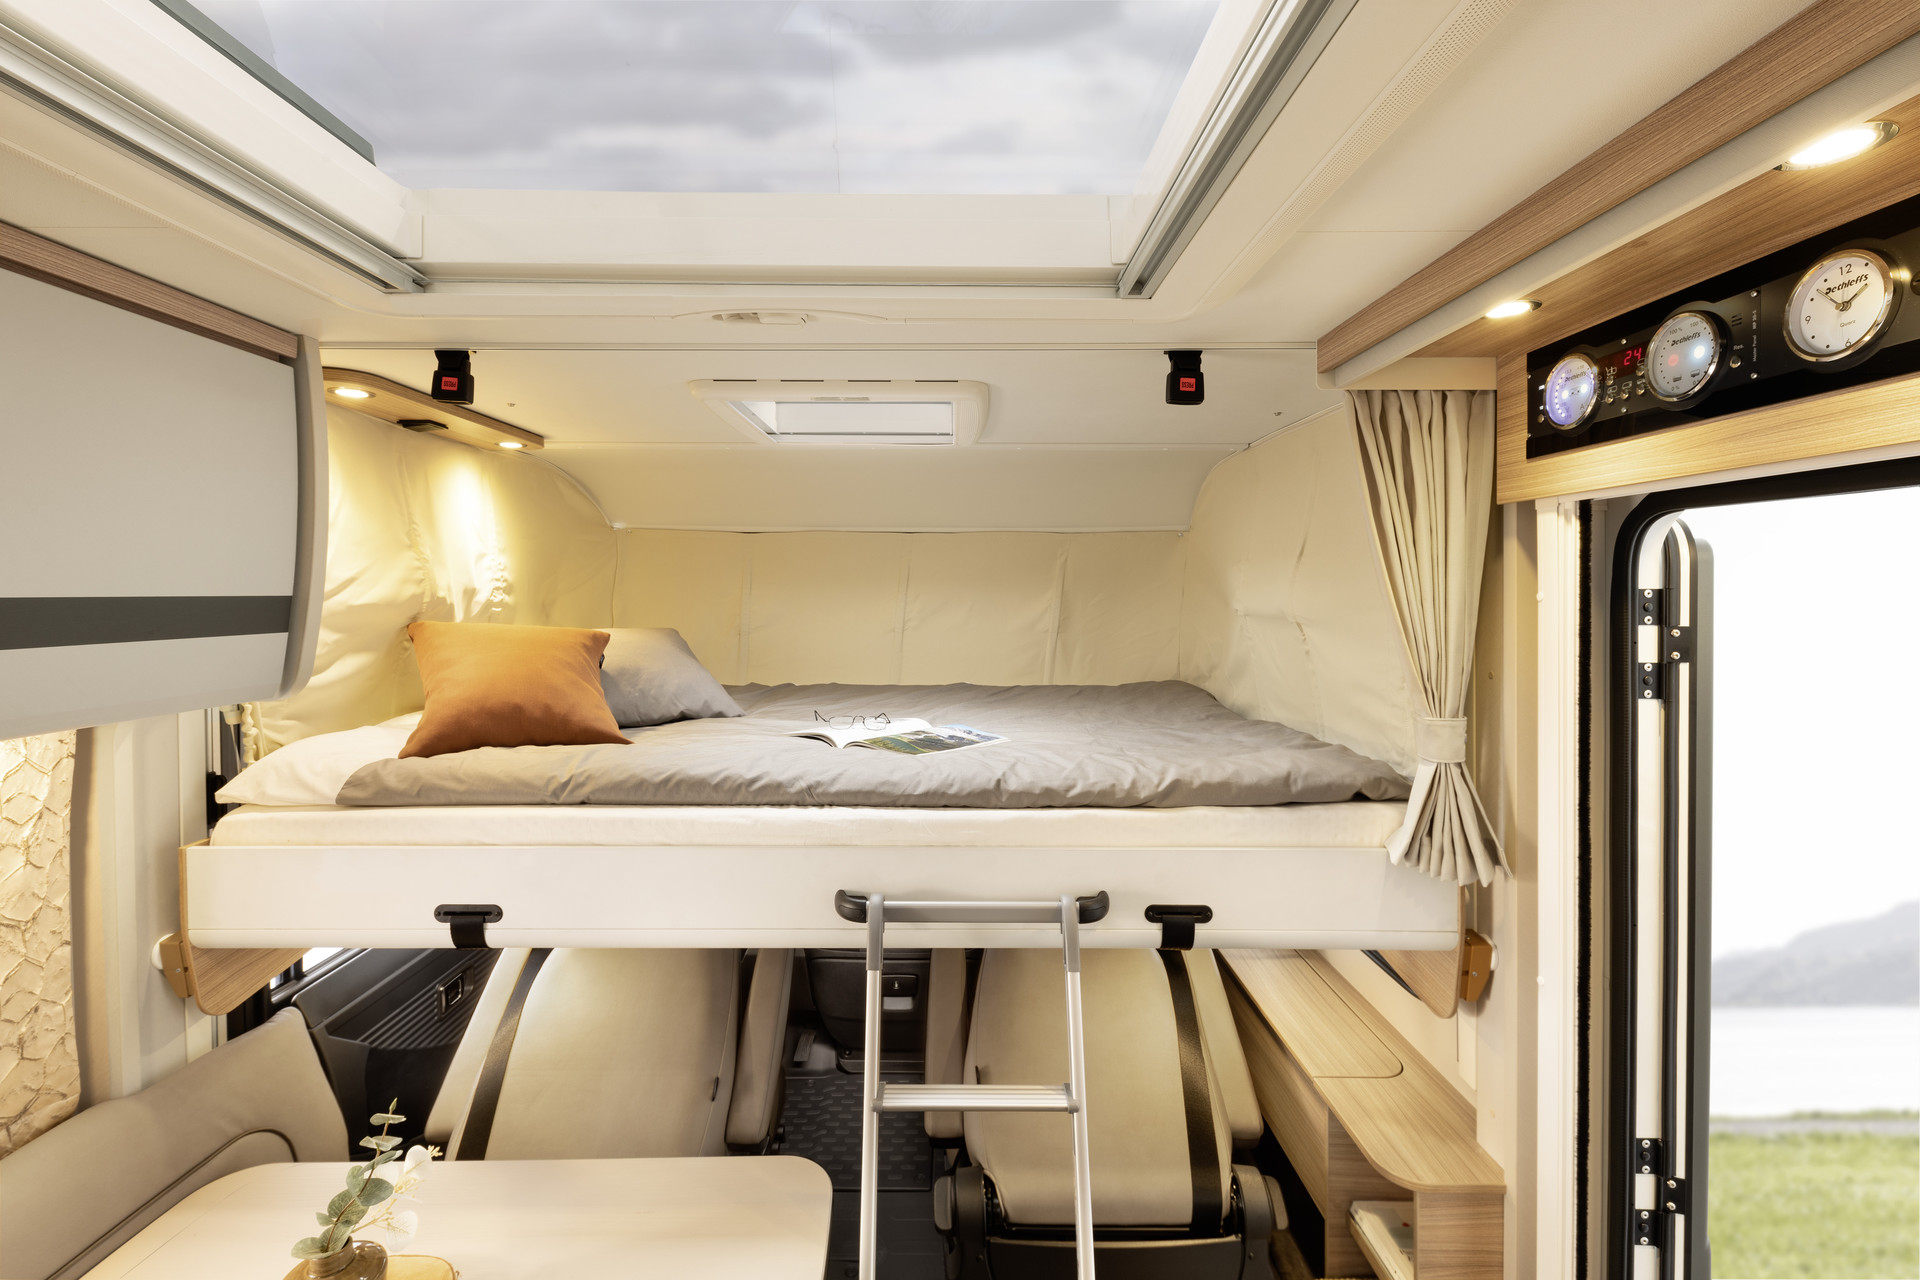 The pull-down bed in the A Class models has a sleeping area with a width of 150 cm